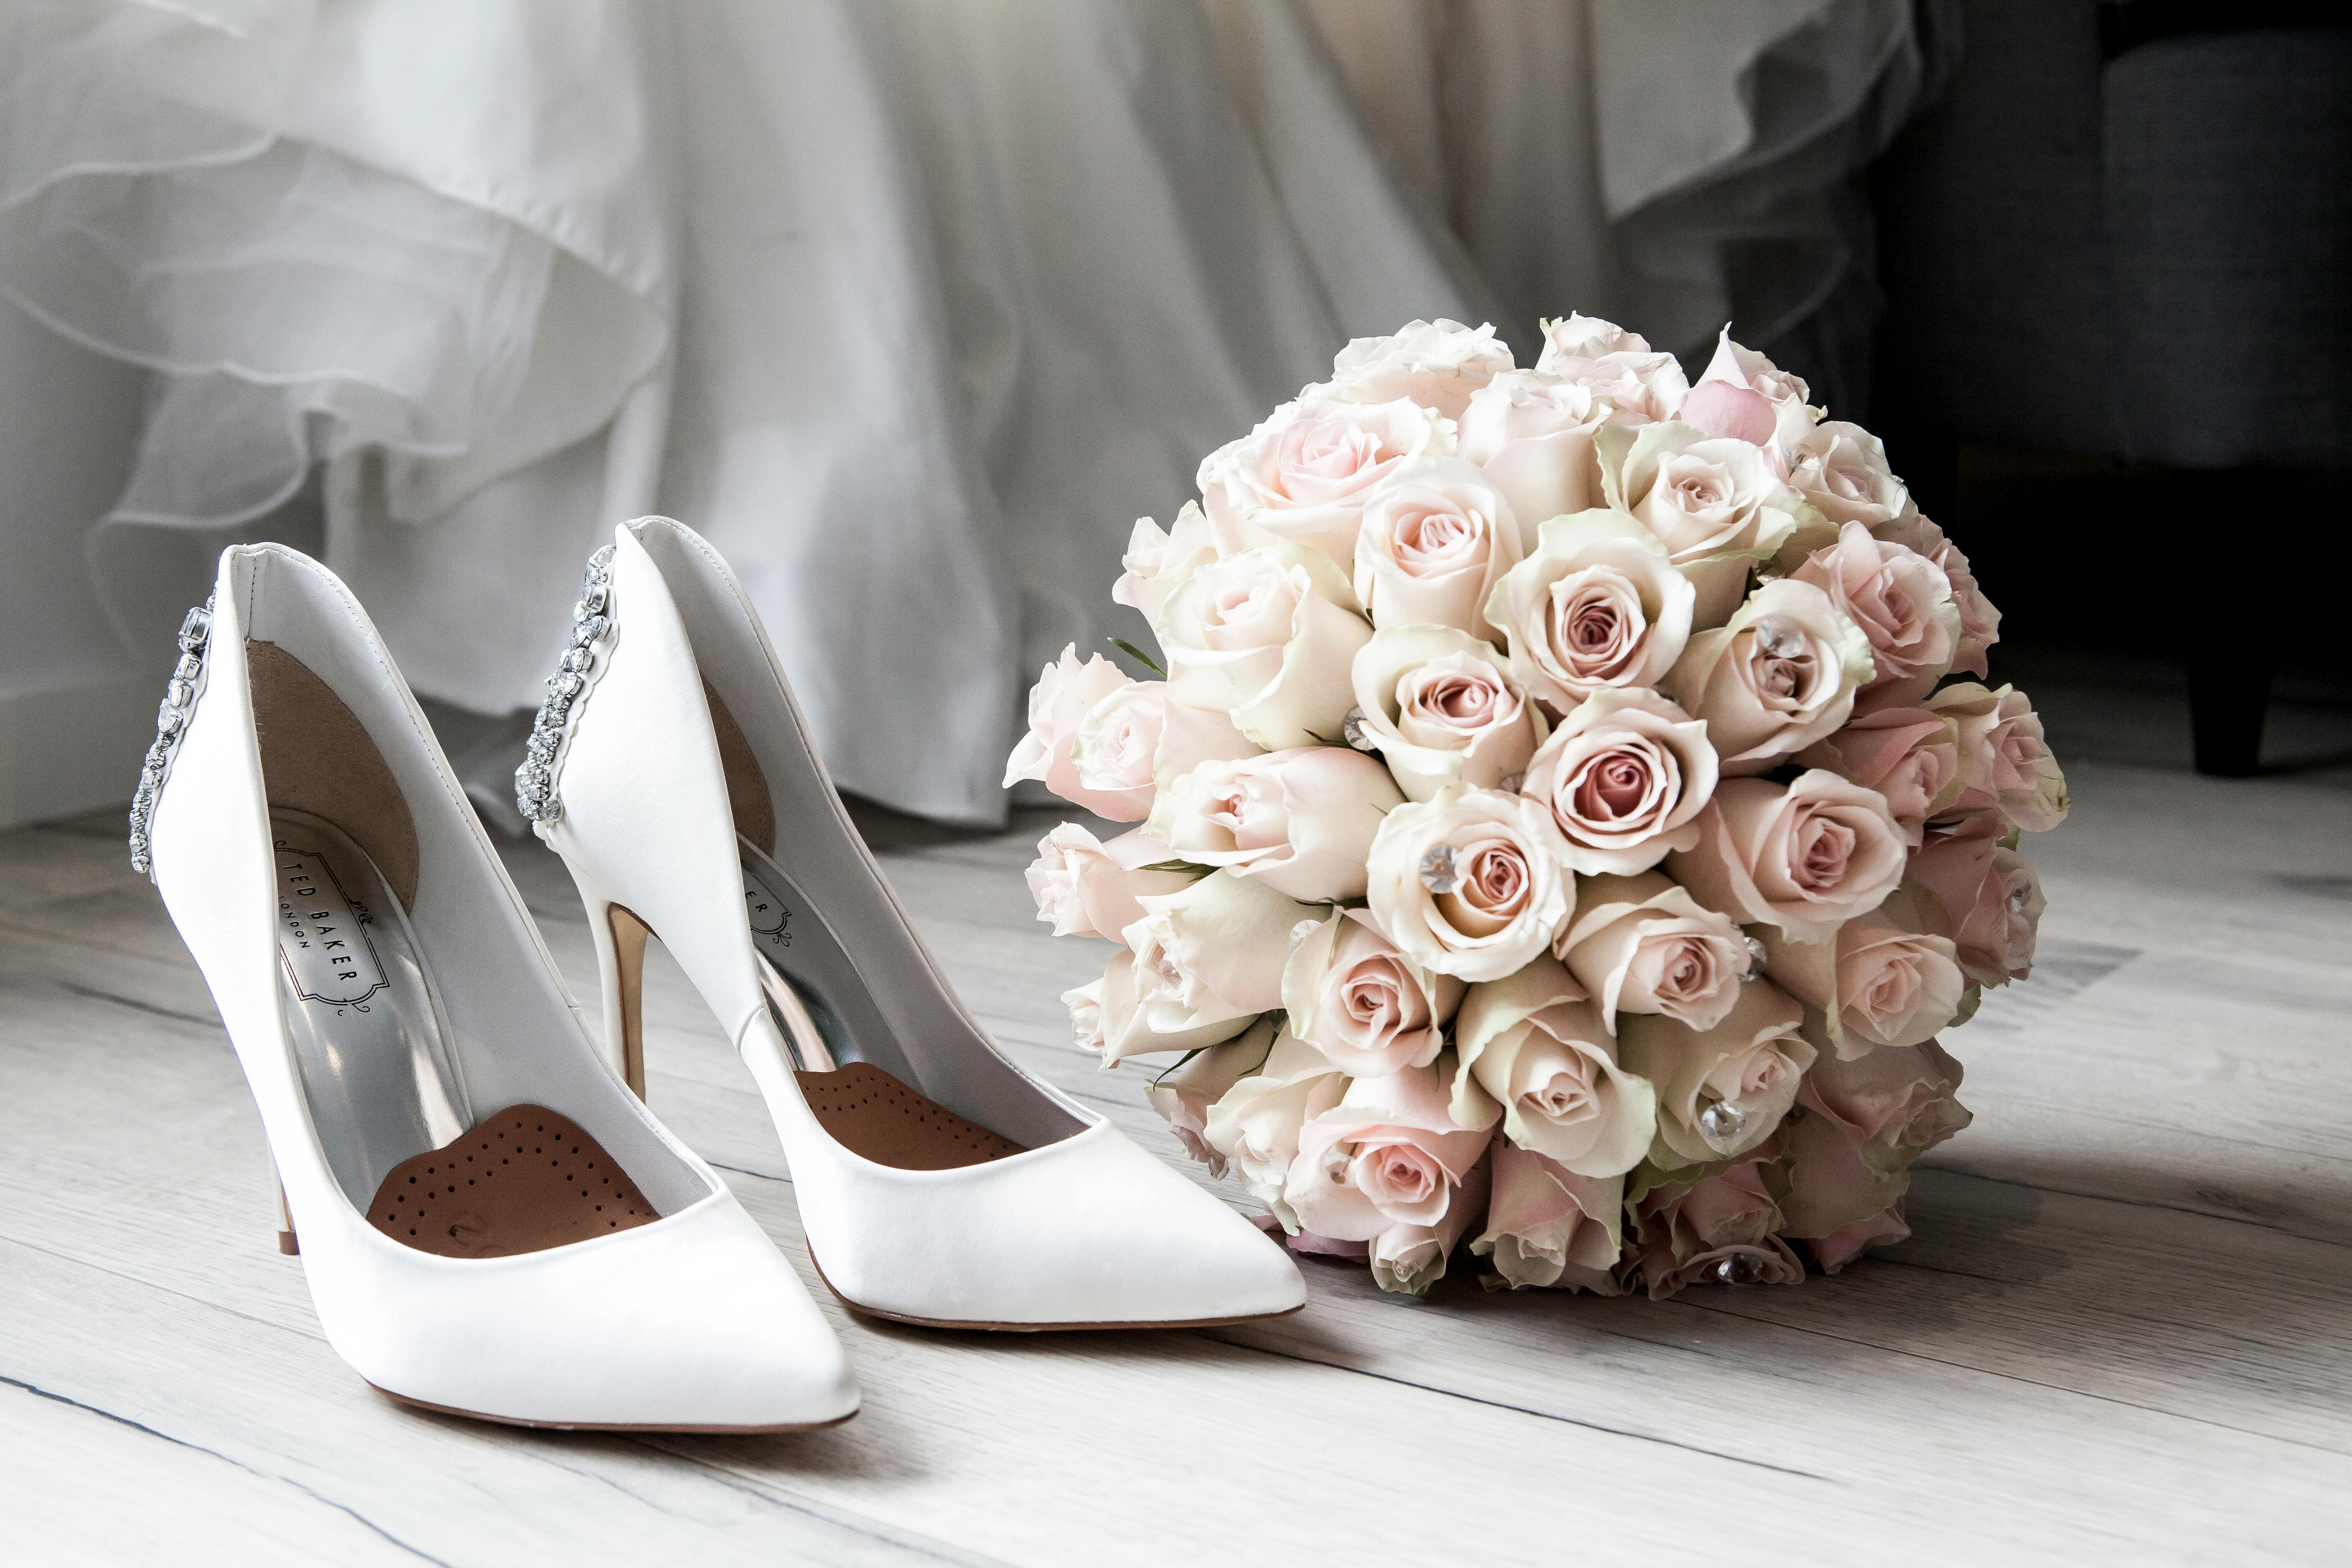 For illustration purposes only. Bridal shoes and bouquet. | Source: Pexels